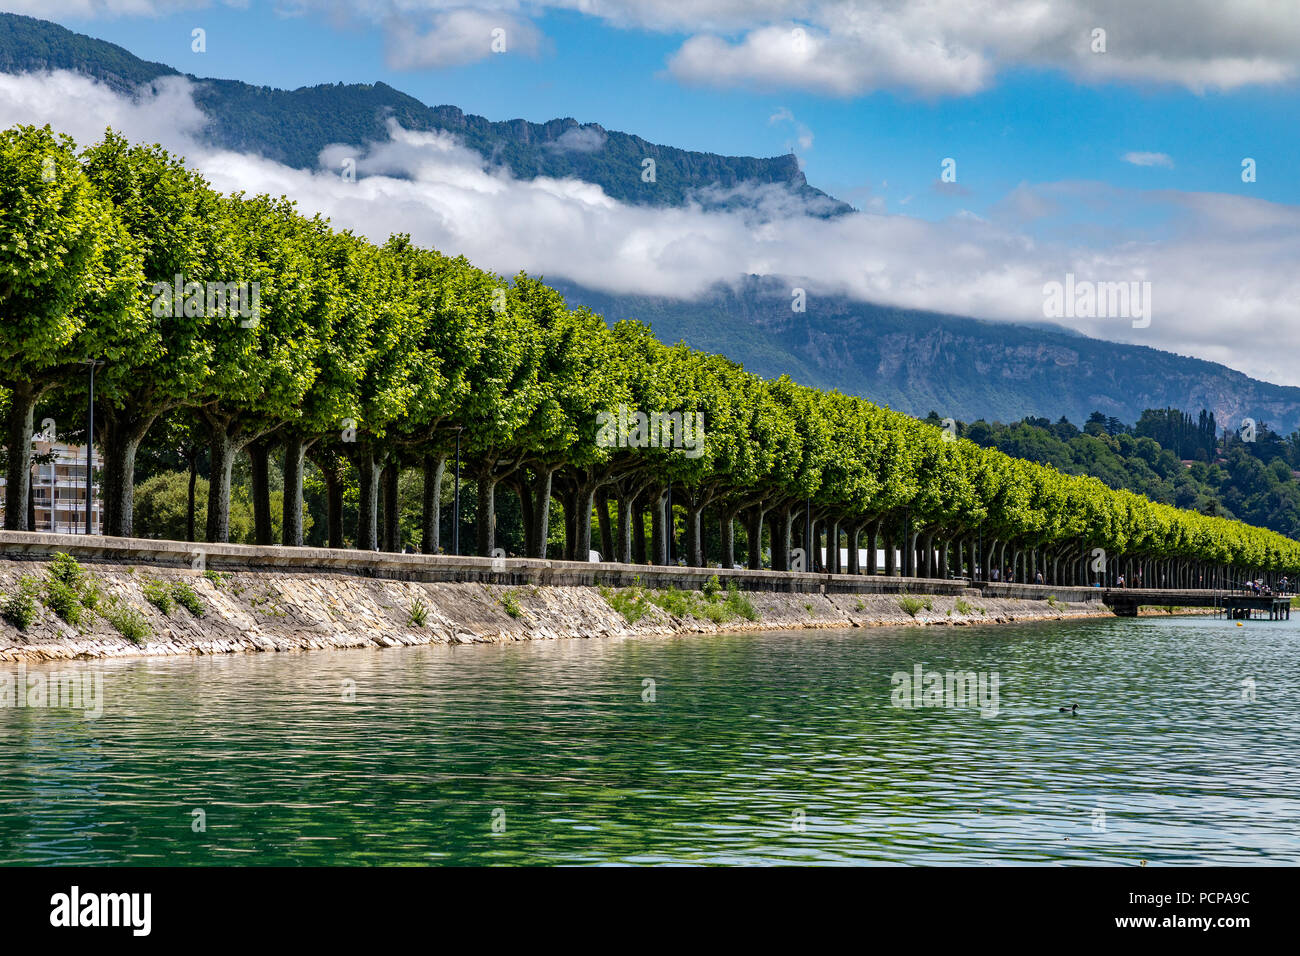 The tree lined Boulevard Du Lac at the Grand Port in the town of Aix les Bains in the Auvergne-Rhone-Alpes region in south-eastern France. On the east Stock Photo